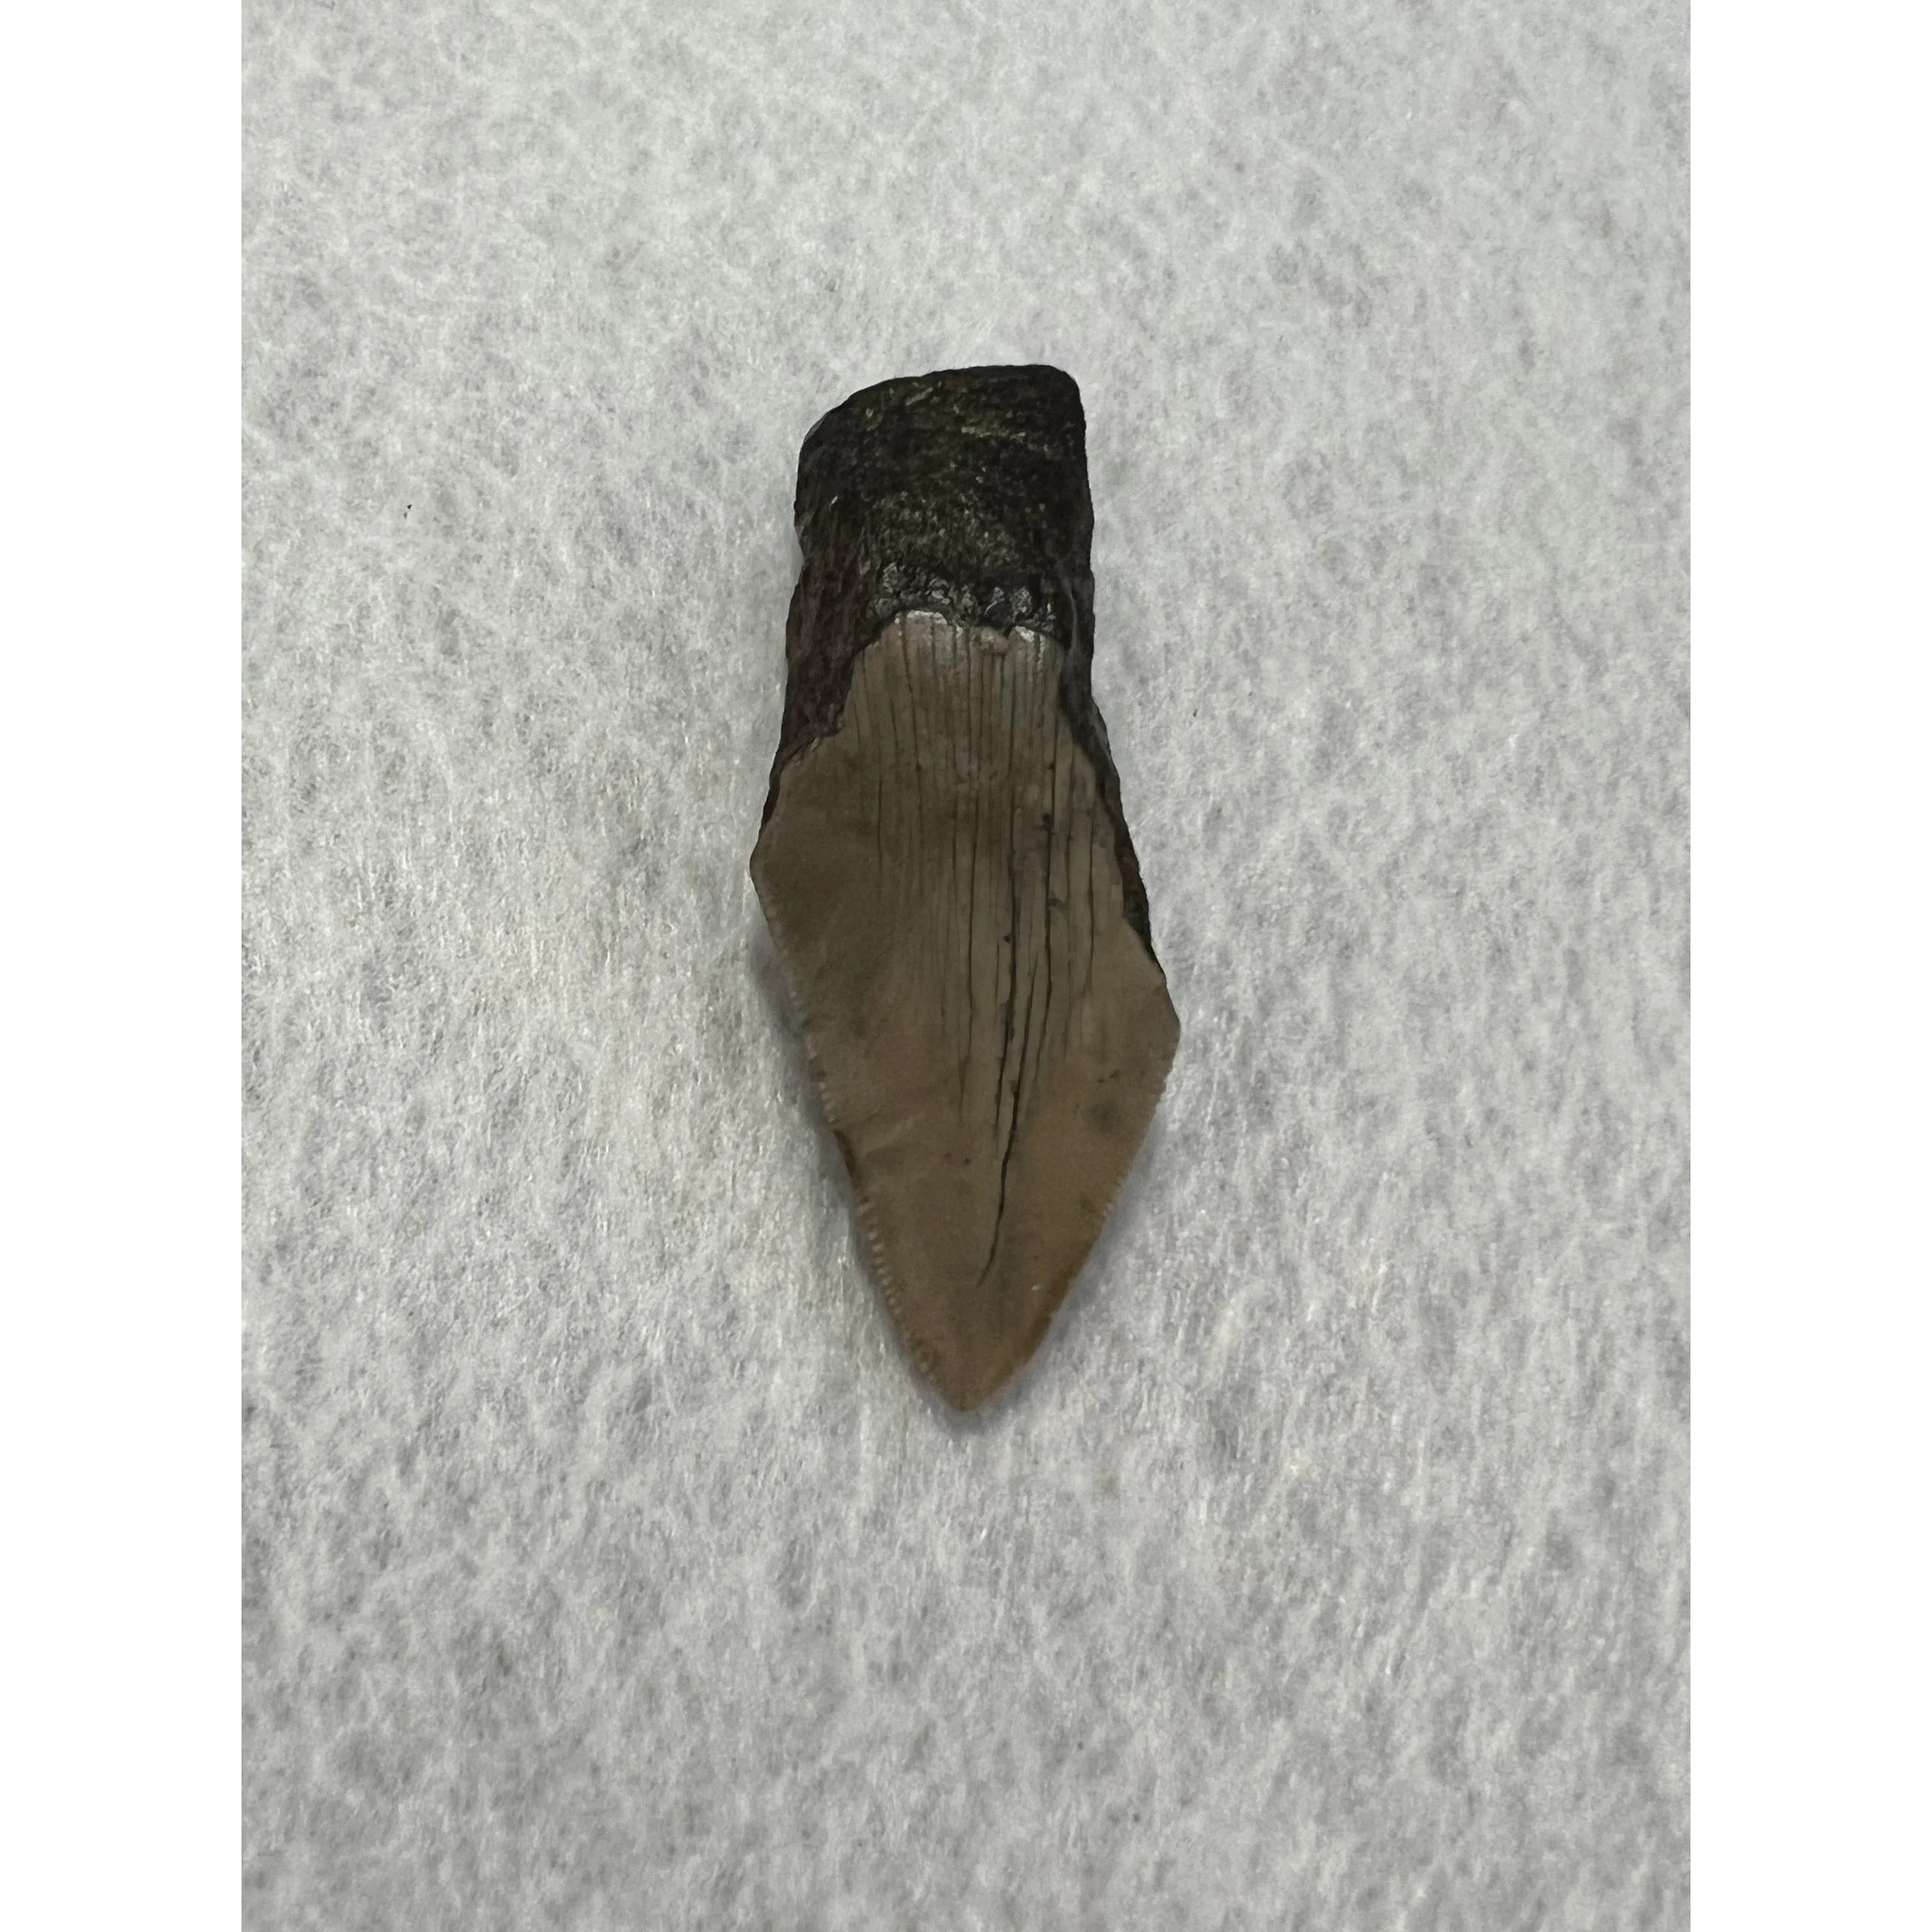 Megalodon Partial Tooth,  South Carolina, 2.69 inch Prehistoric Online